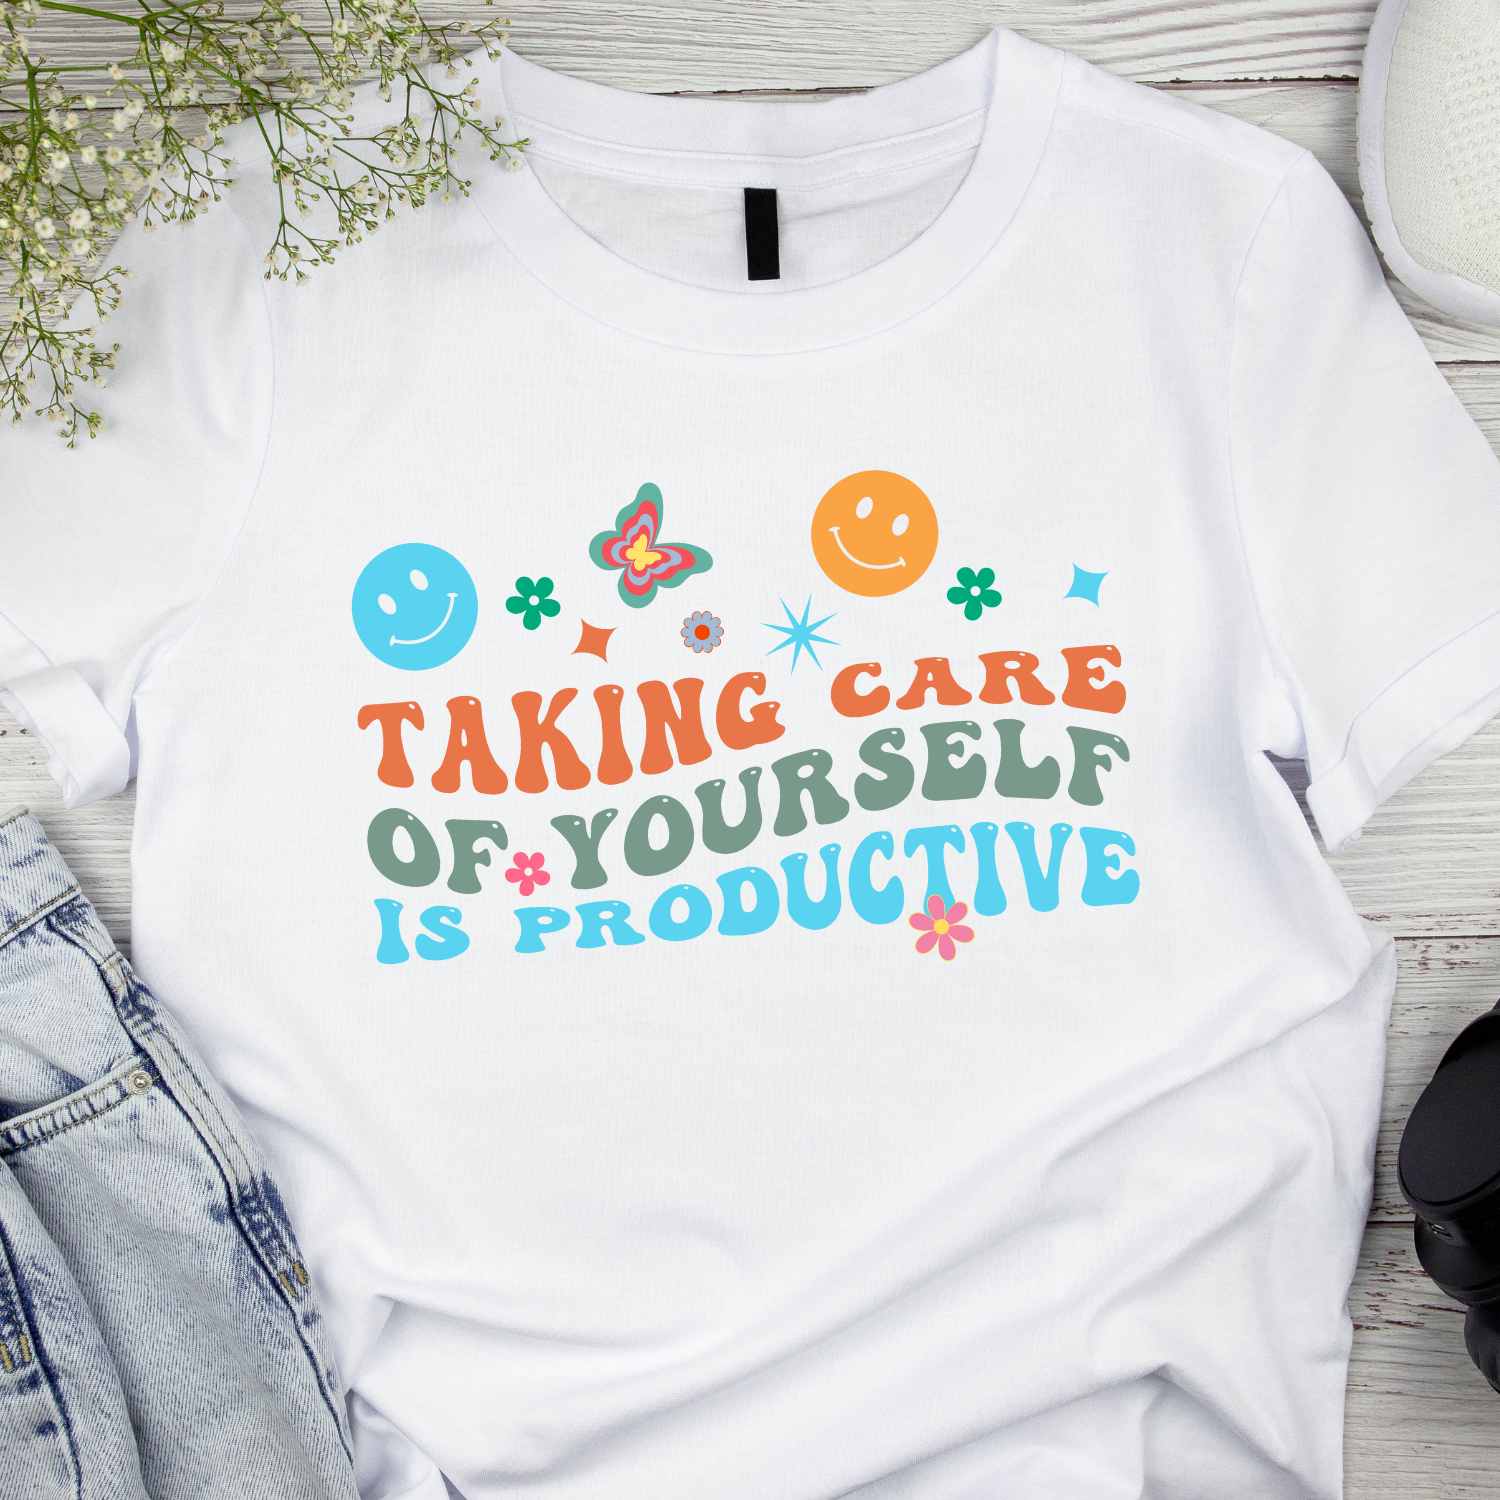 Taking Care of yourself is productive Groovy t-shirt Design